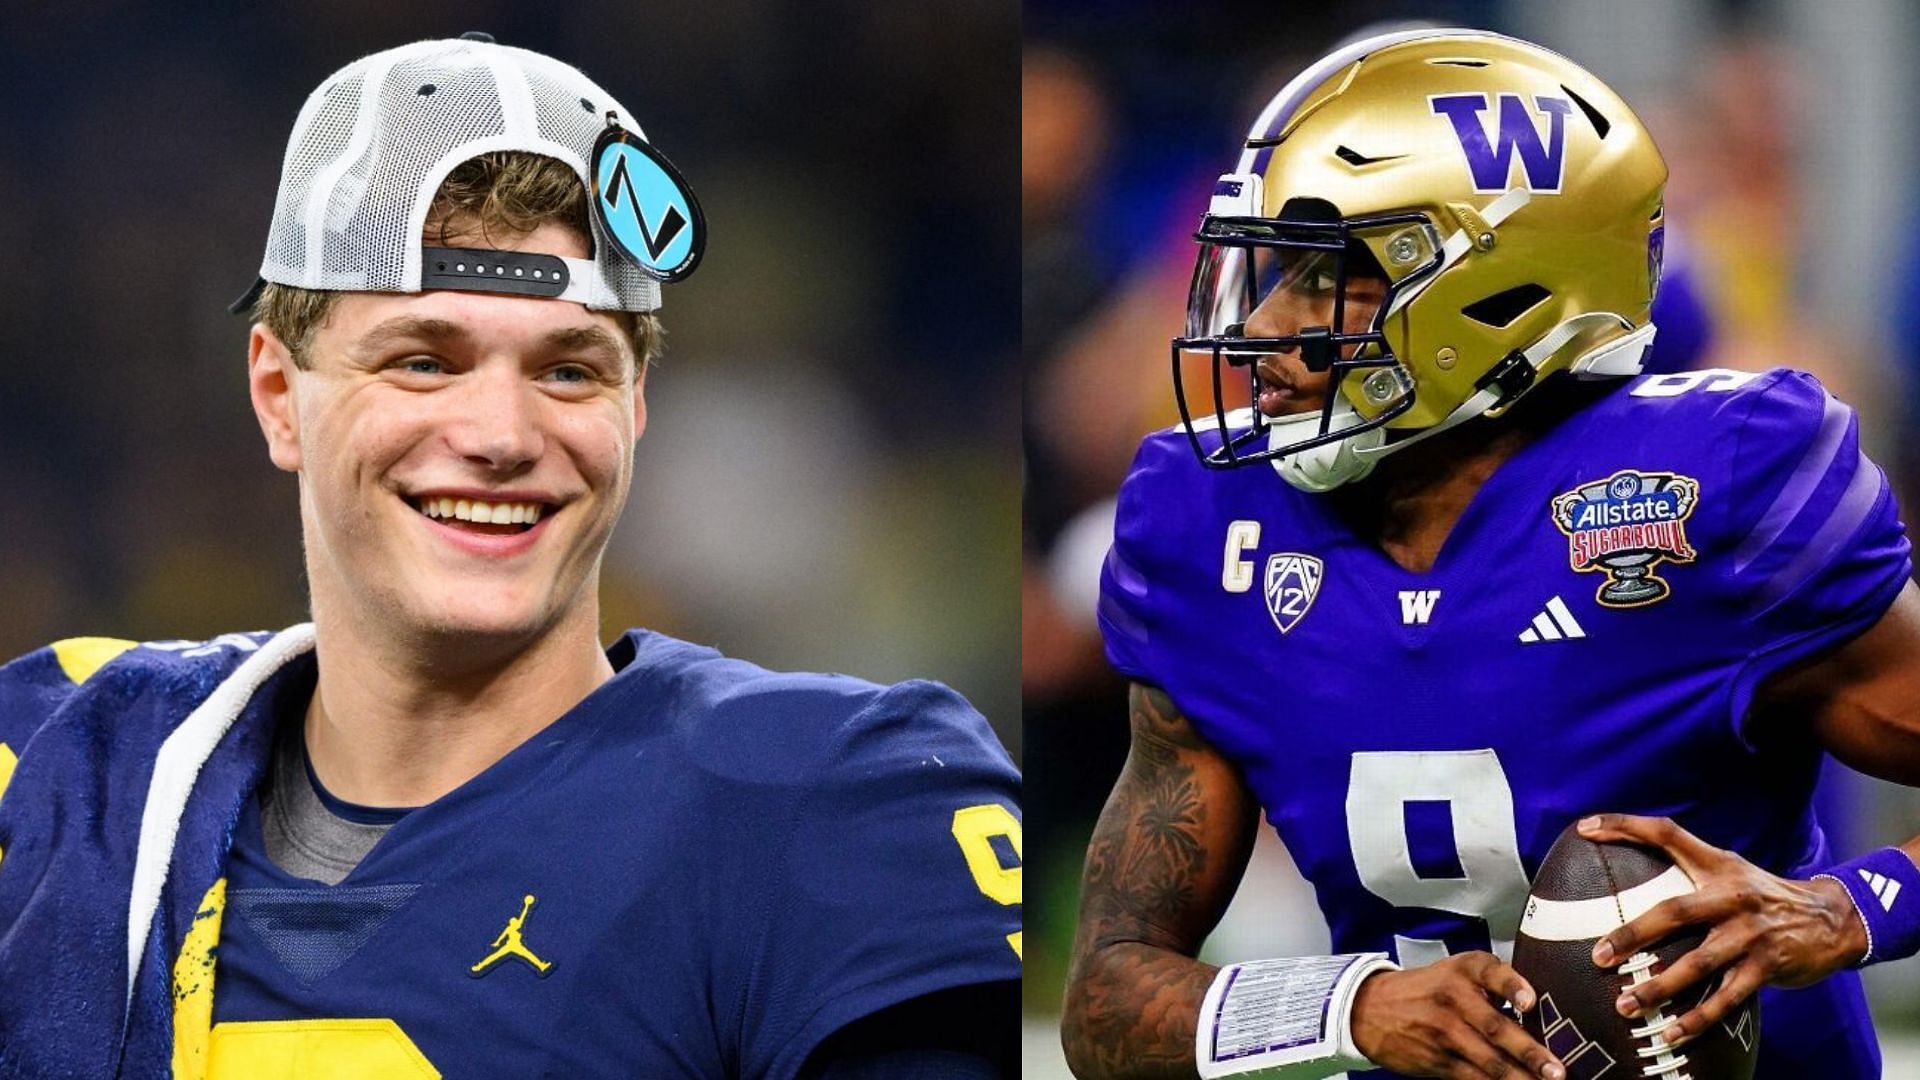 Michigan vs. Washington, which team is going to win the National Championship?